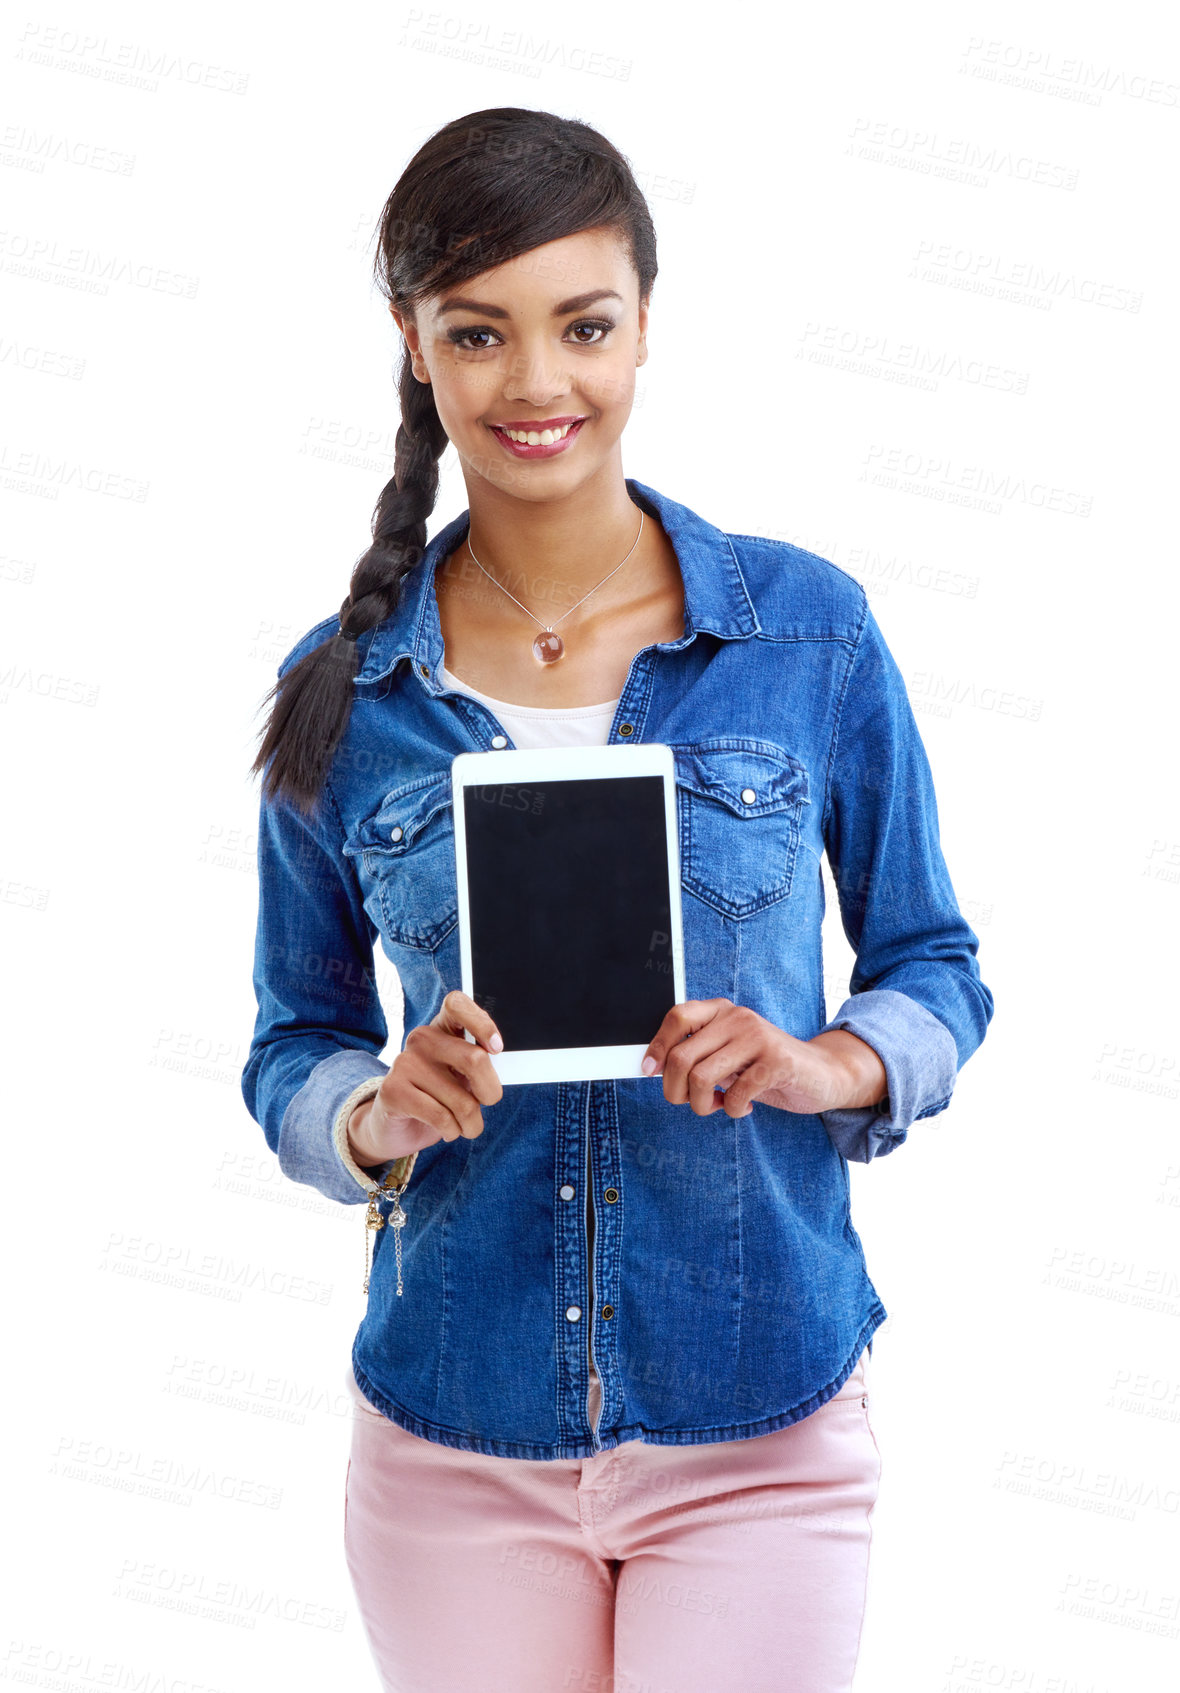 Buy stock photo Studio shot of a young woman showing you a digital tablet isolated on white